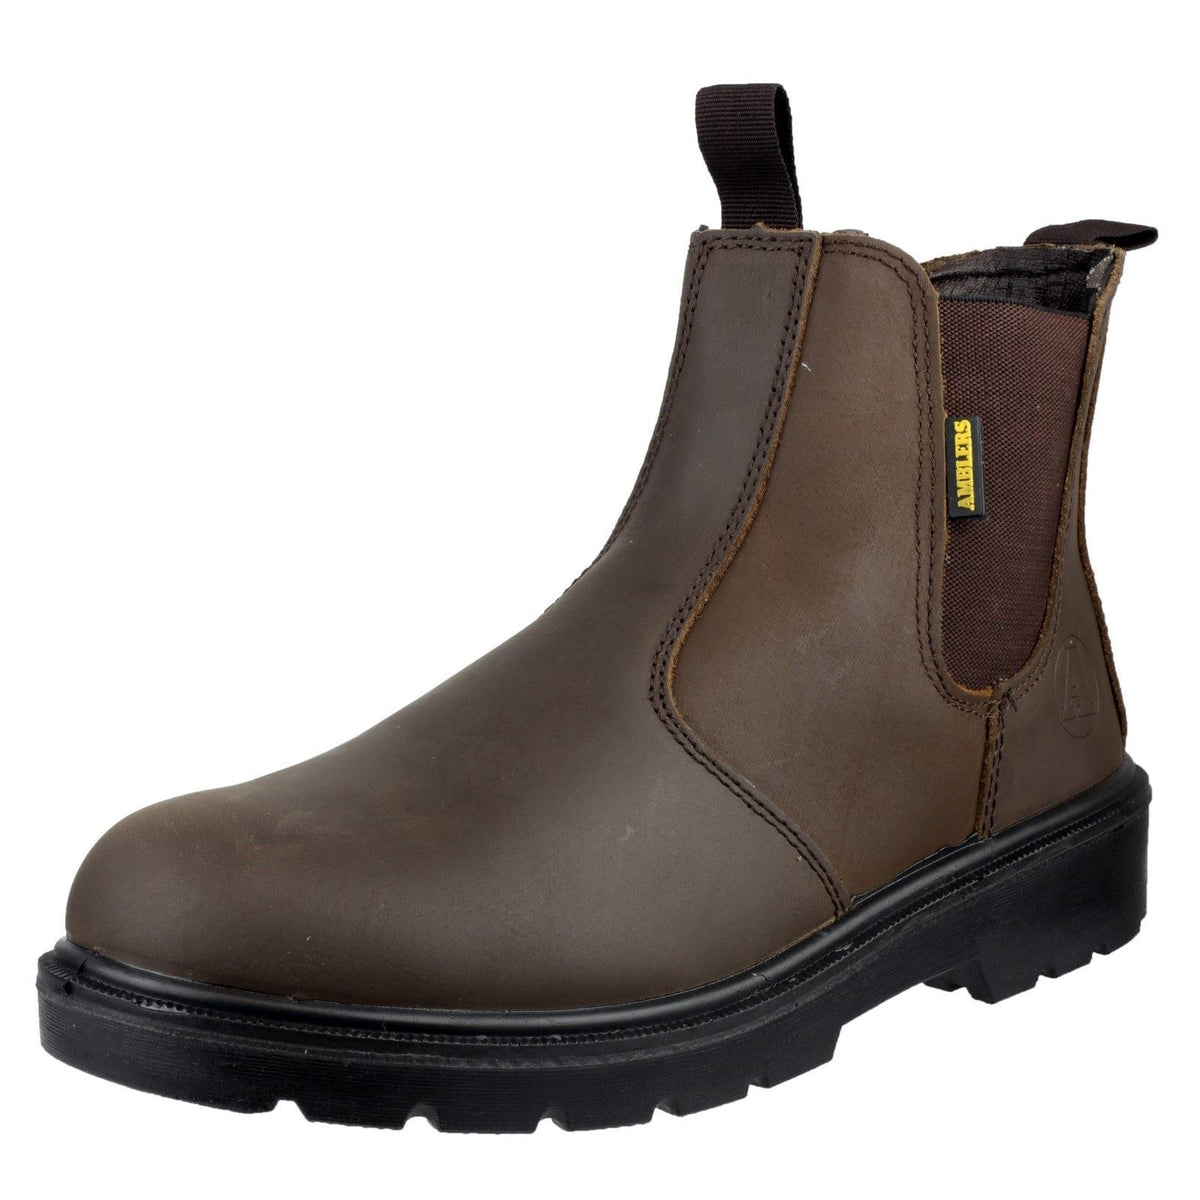 Amblers Safety FS128 Hardwearing Pull On Safety Dealer Boots